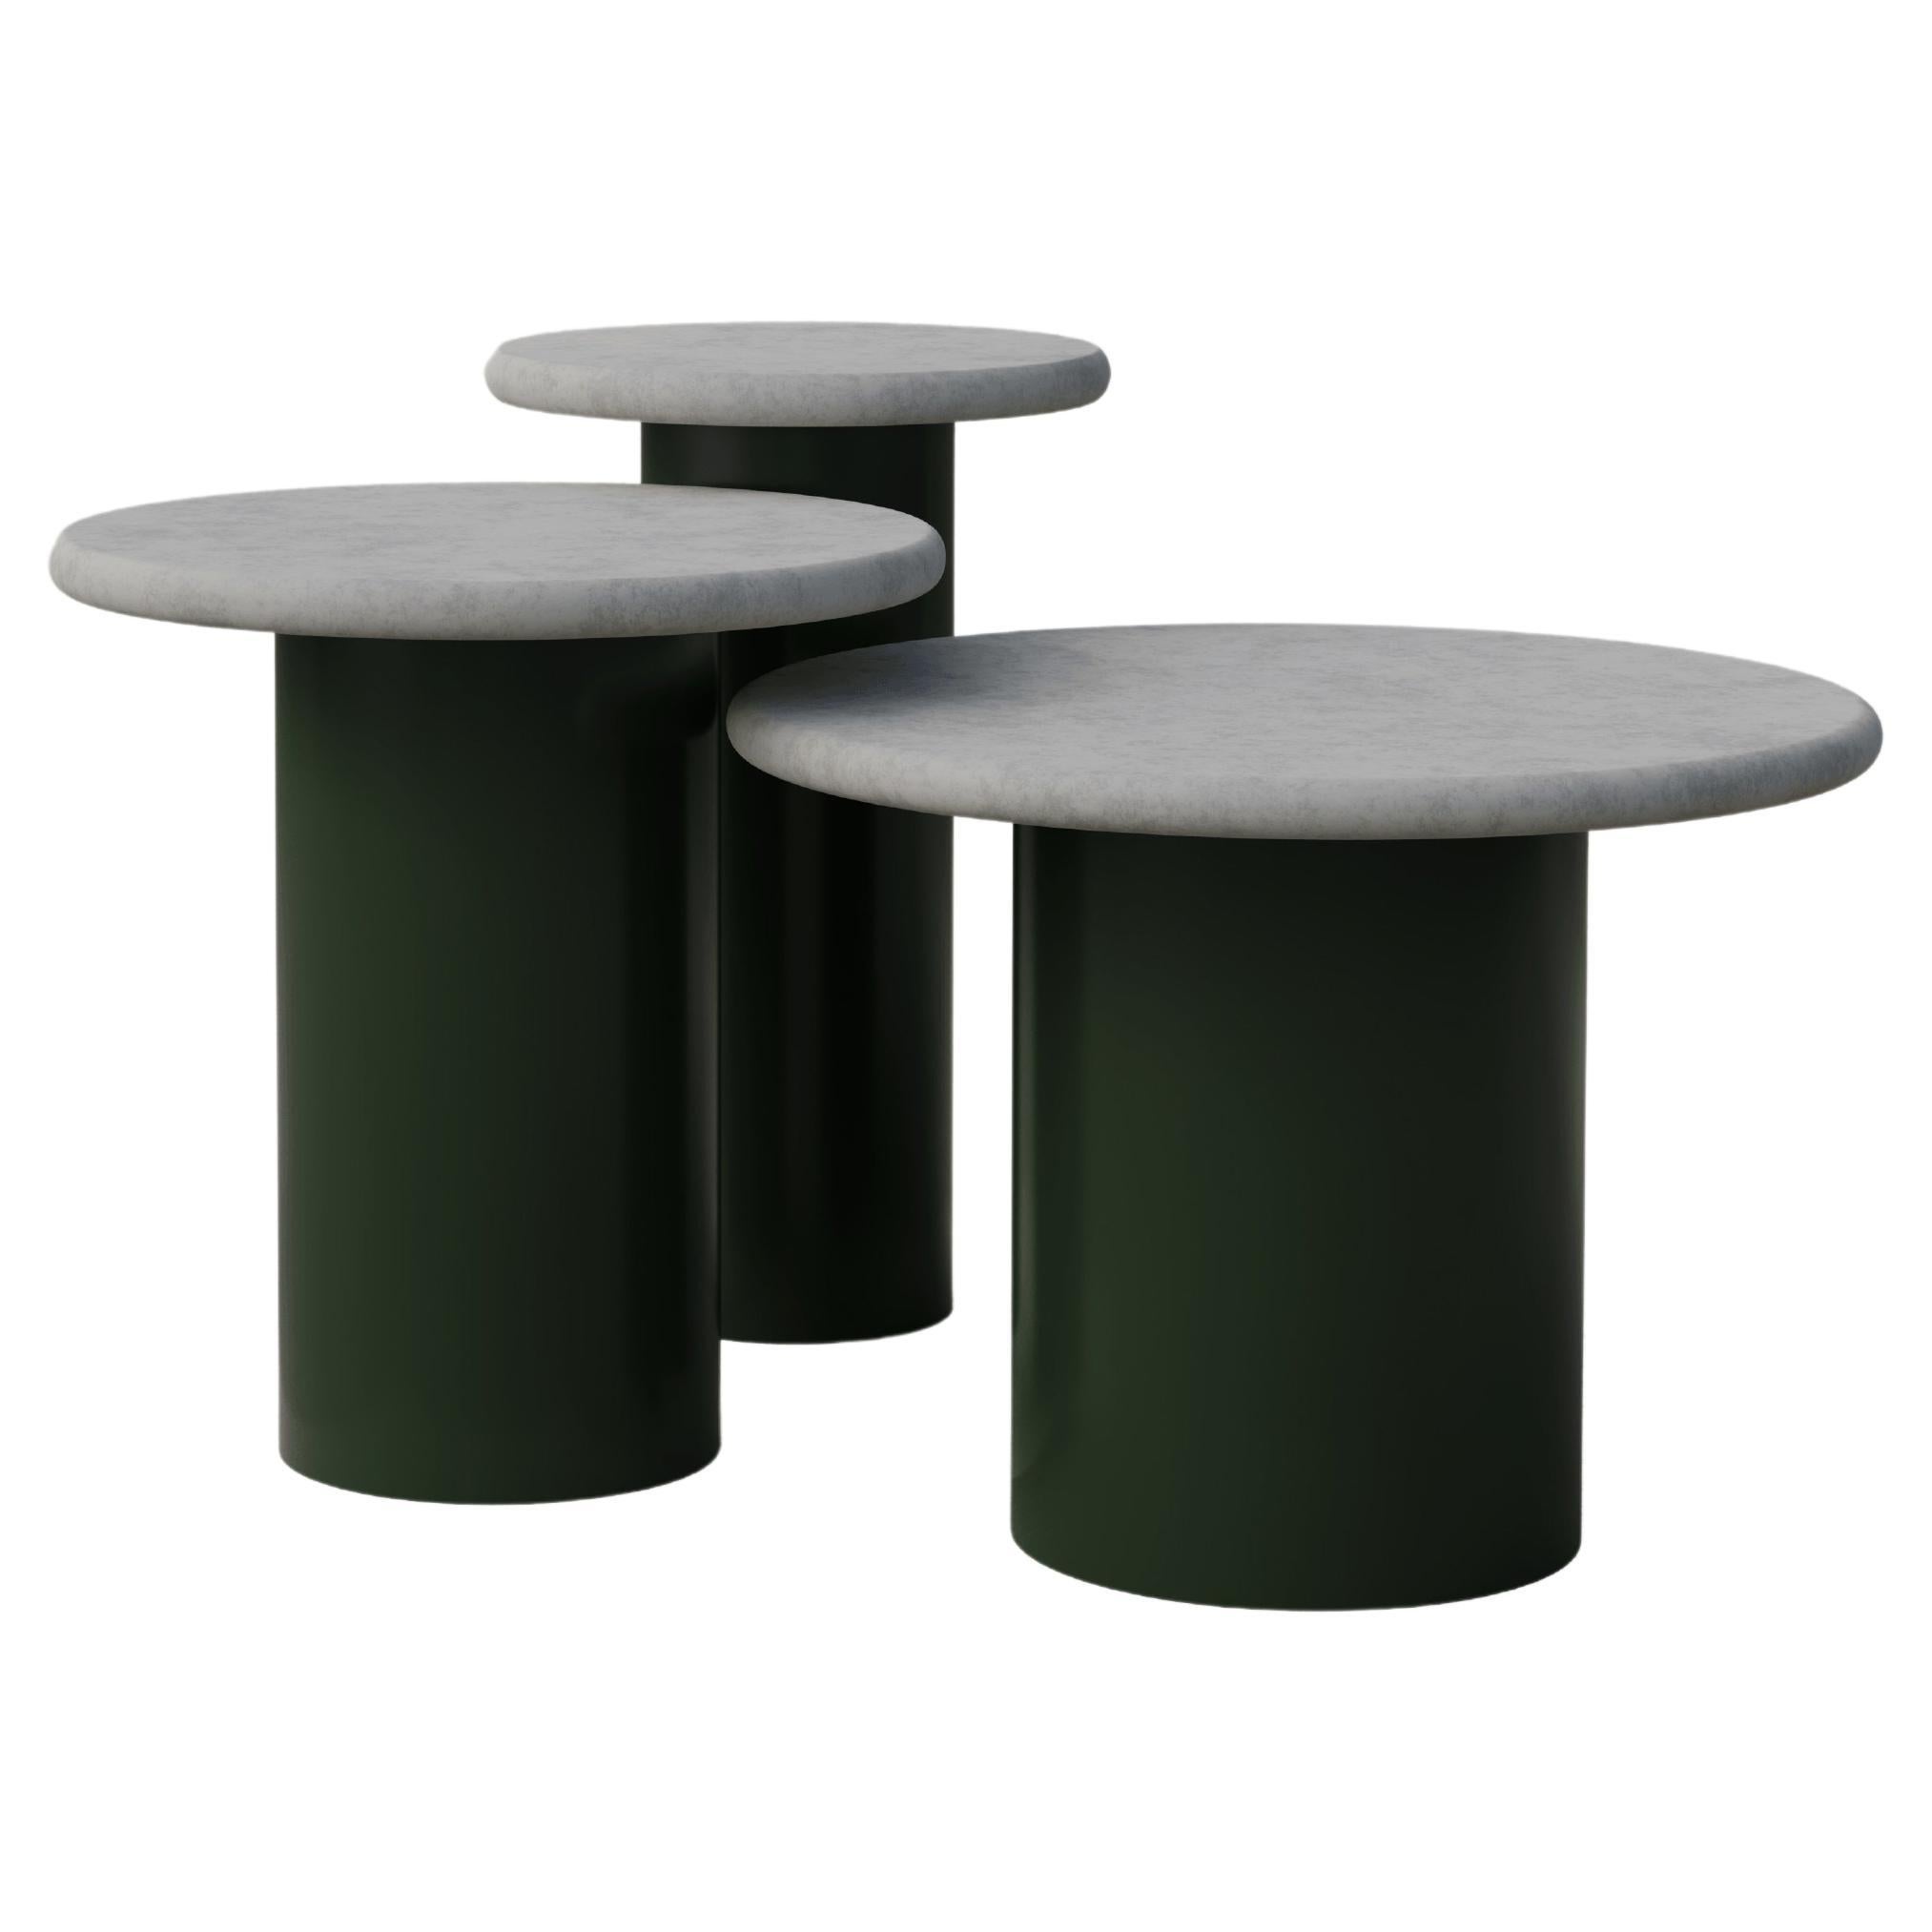 Raindrop Side Table Set, 300, 400, 500, Microcrete / Moss Green For Sale